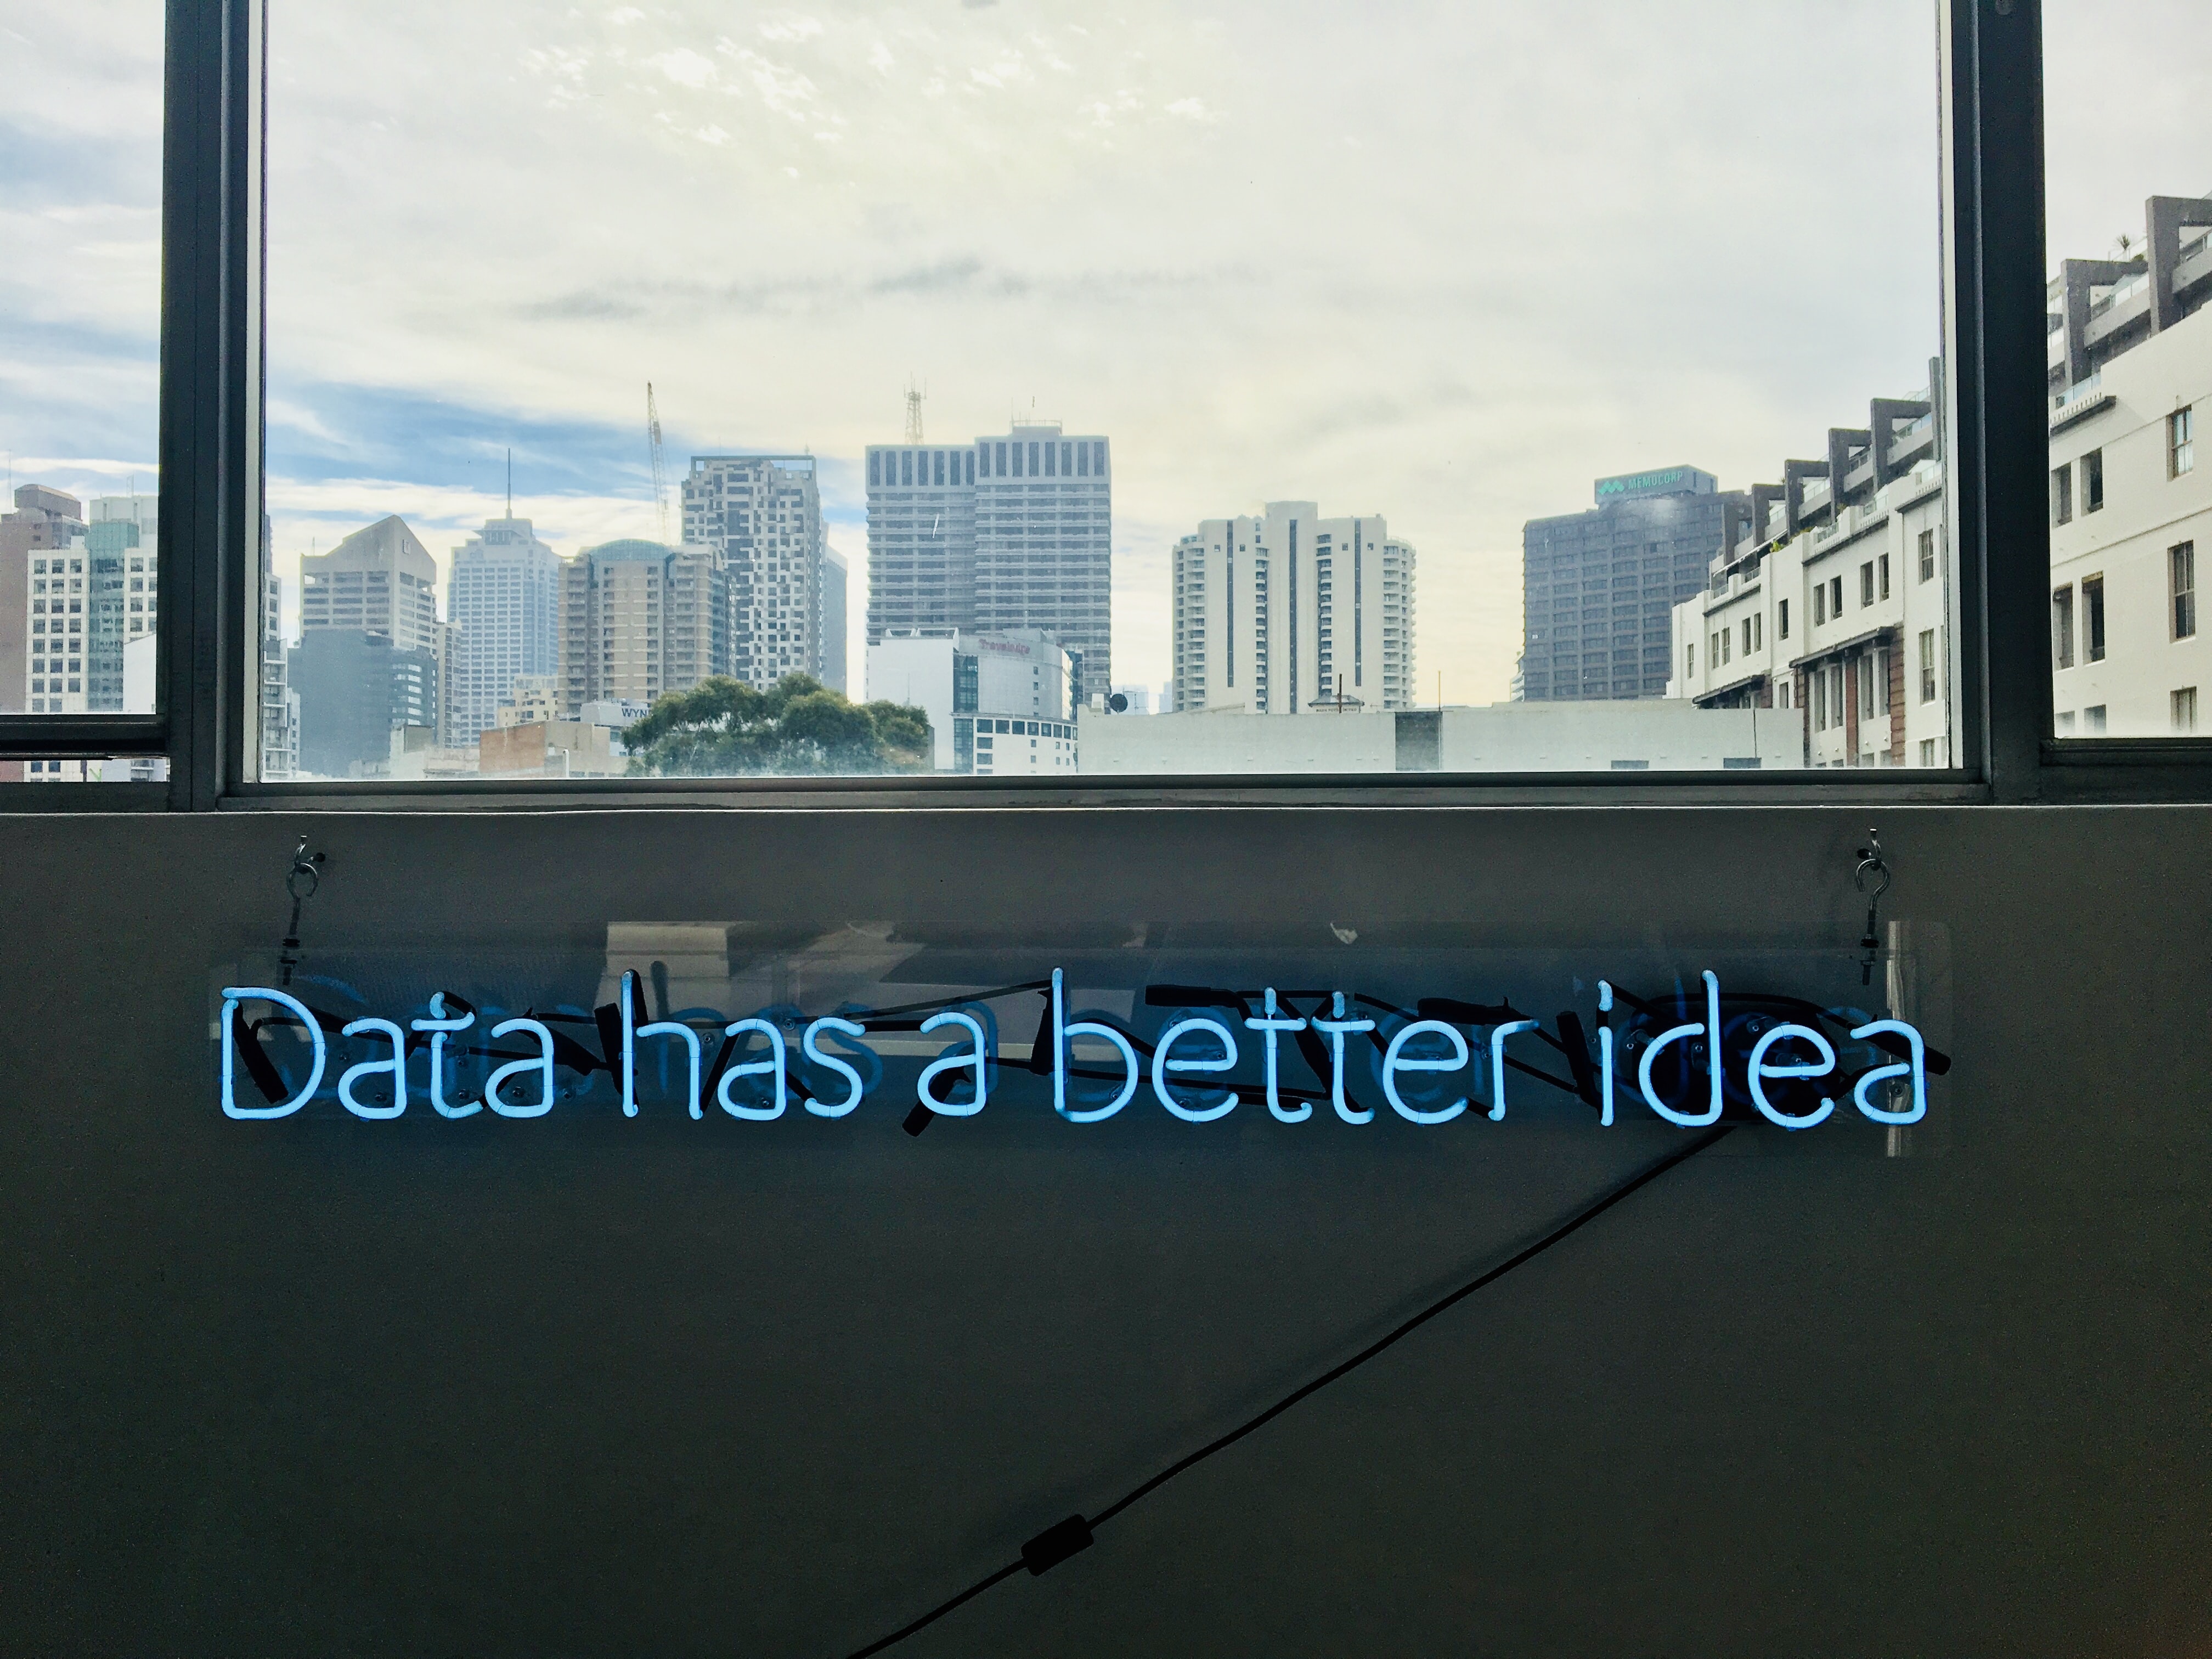 white building with data has a better idea writing